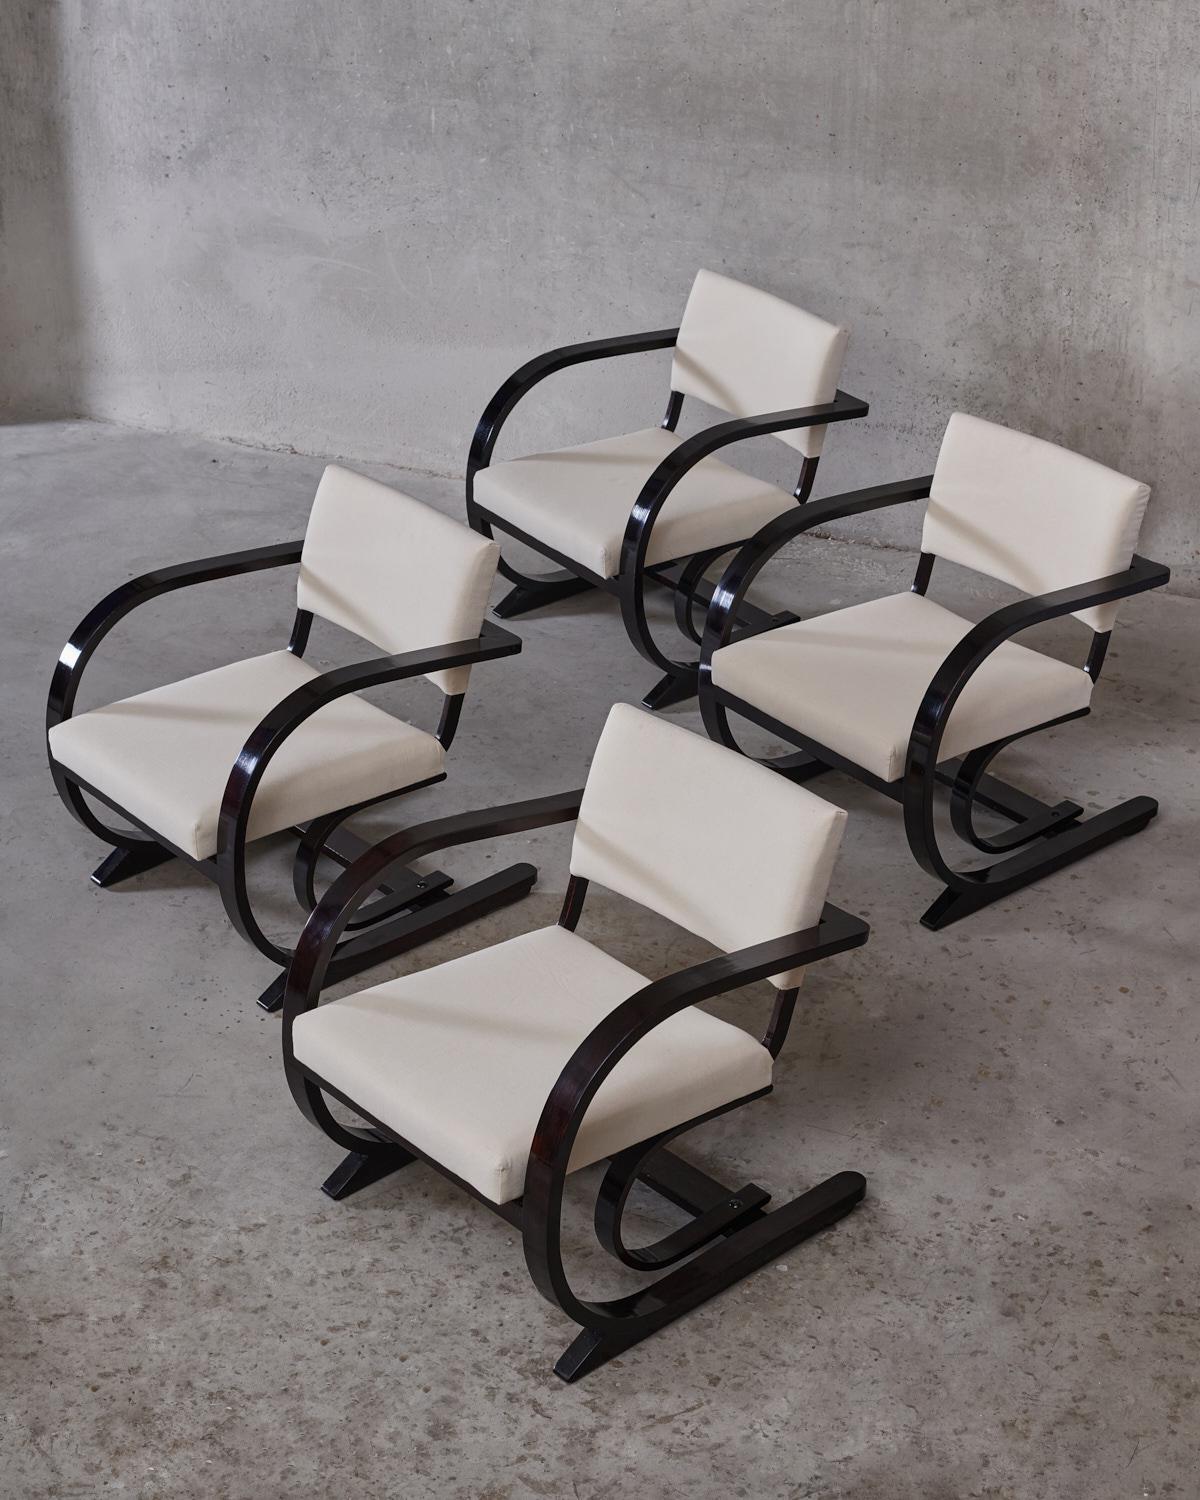 Bas Van Pelt, a set of four Art Deco / early mid-century easy chairs, rosewood color stained oak frame with new upholstery, manufactured in the Netherlands circa 1940
This armchair was designed by Bas Van Pelt and manufactured in The Netherlands.